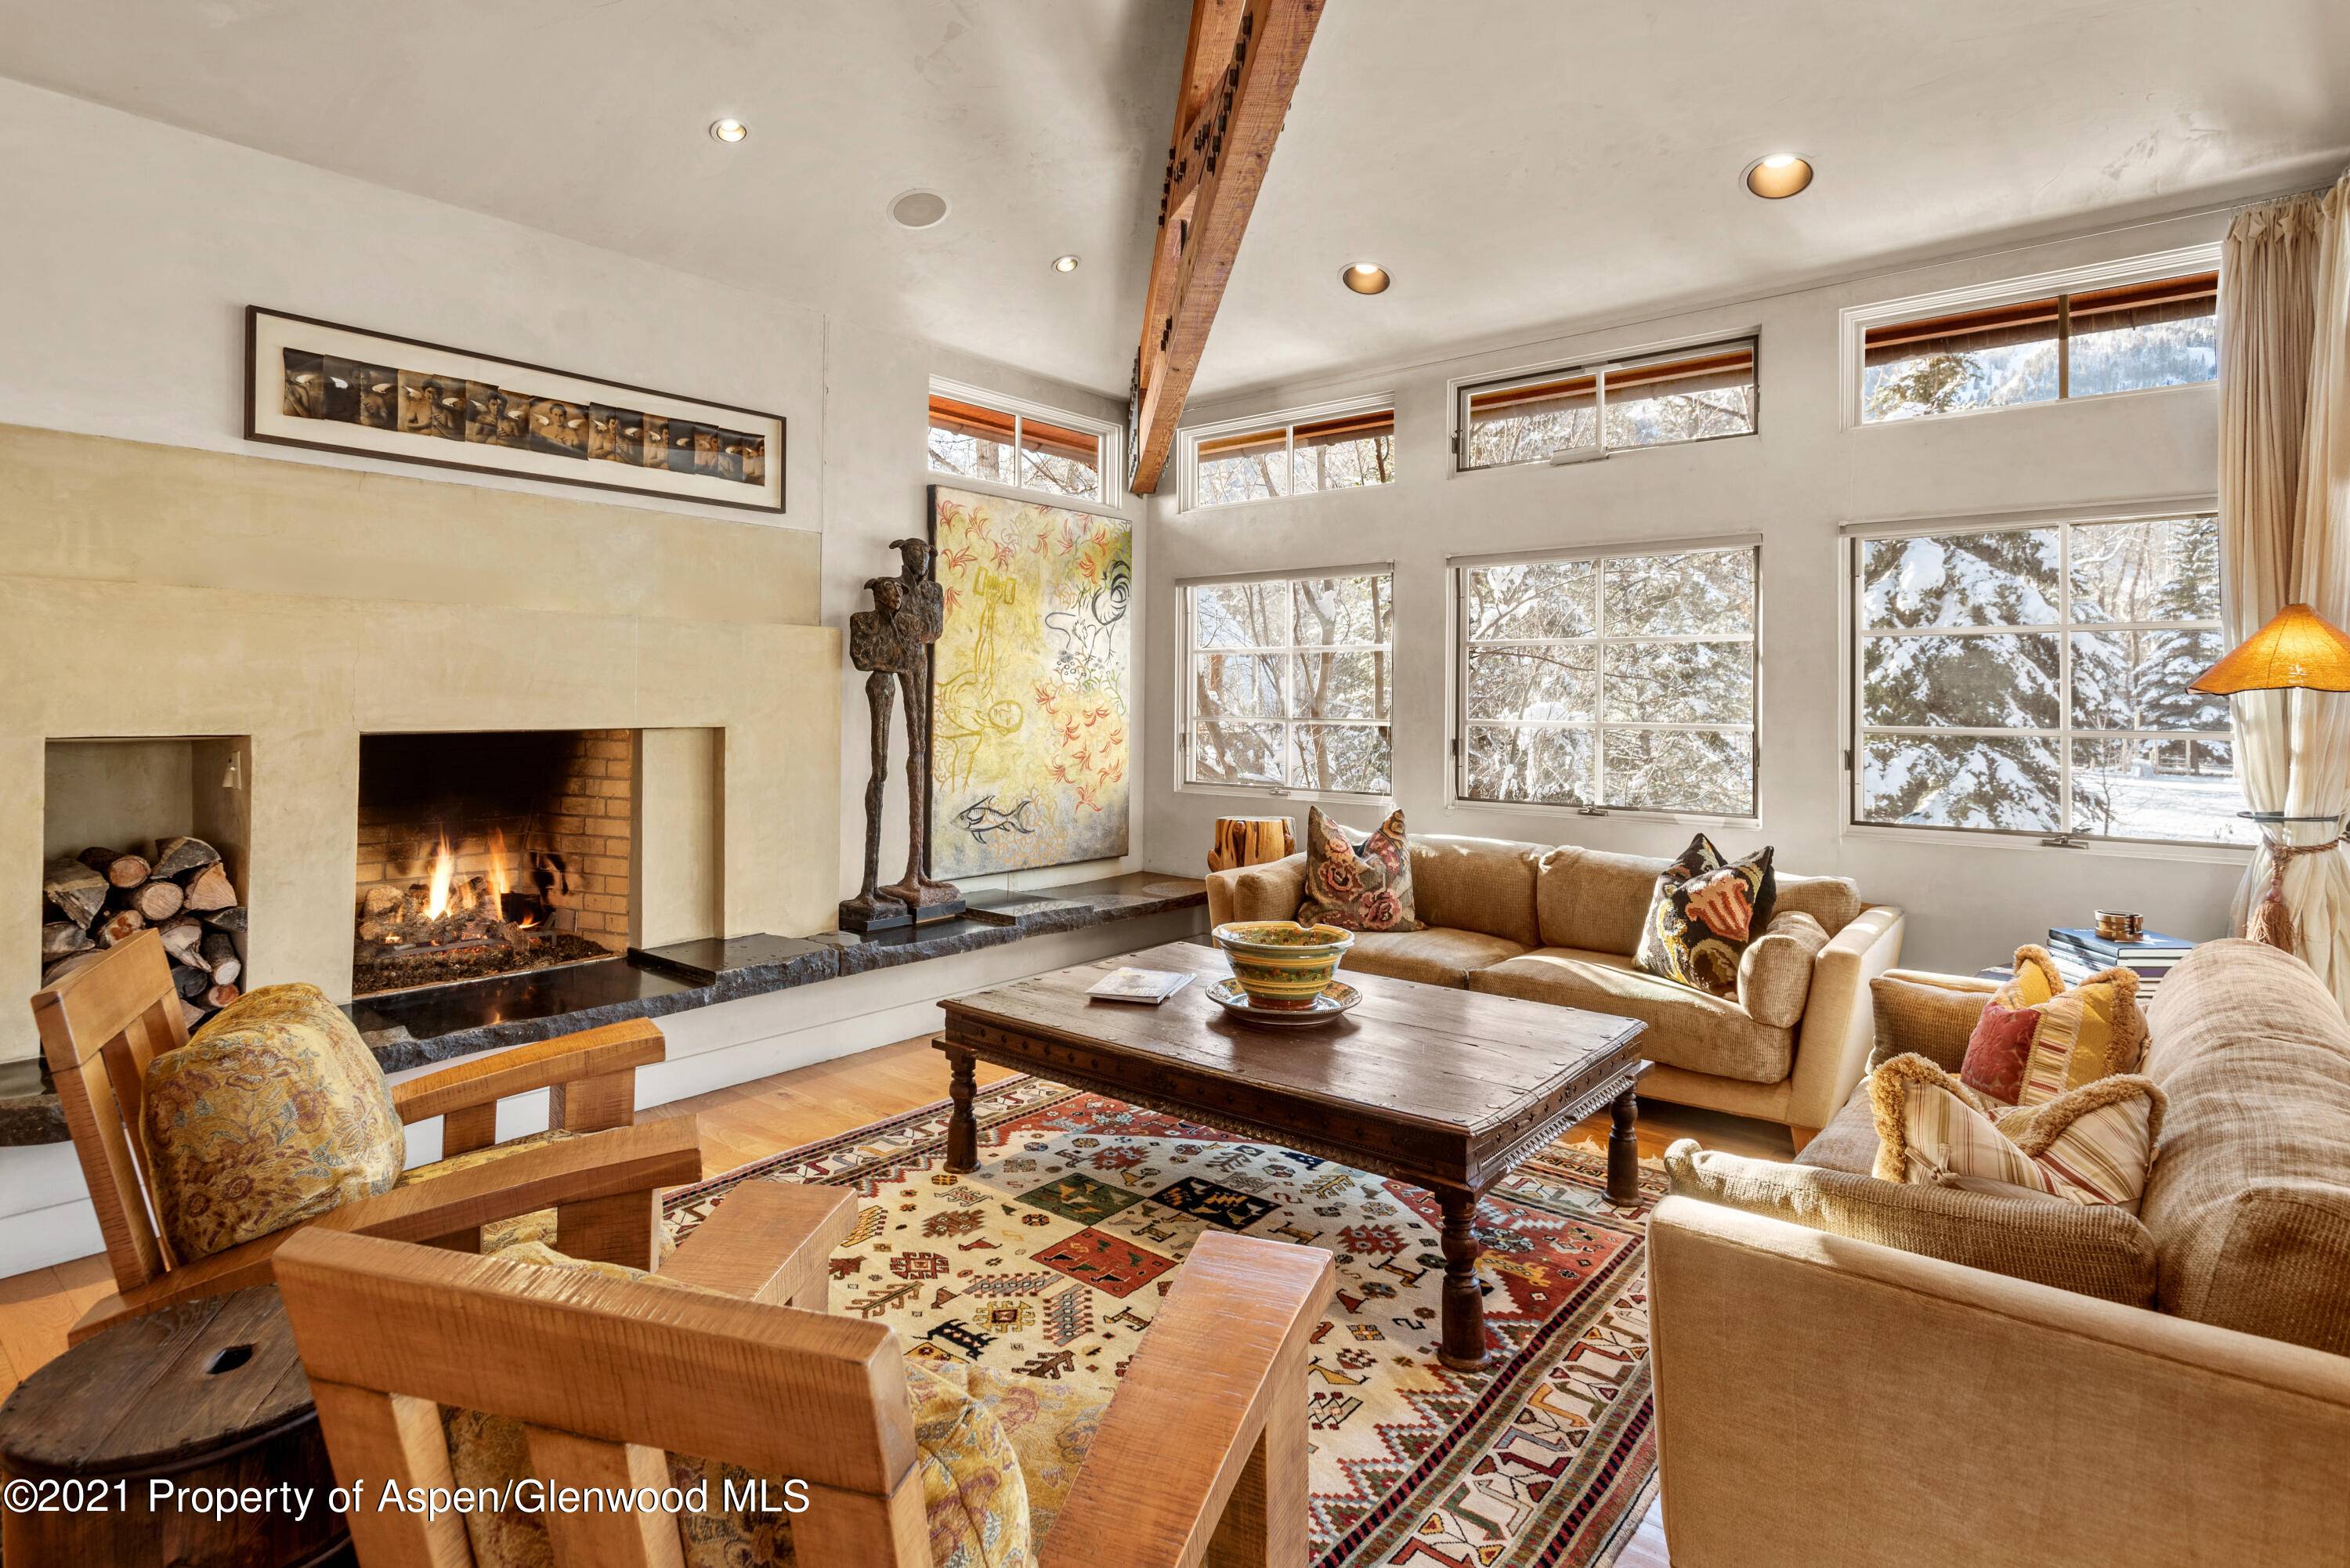 Sophisticated four bedroom Aspen residence offers serene location and breath taking views of the Roaring Fork River and Aspen Mountain.